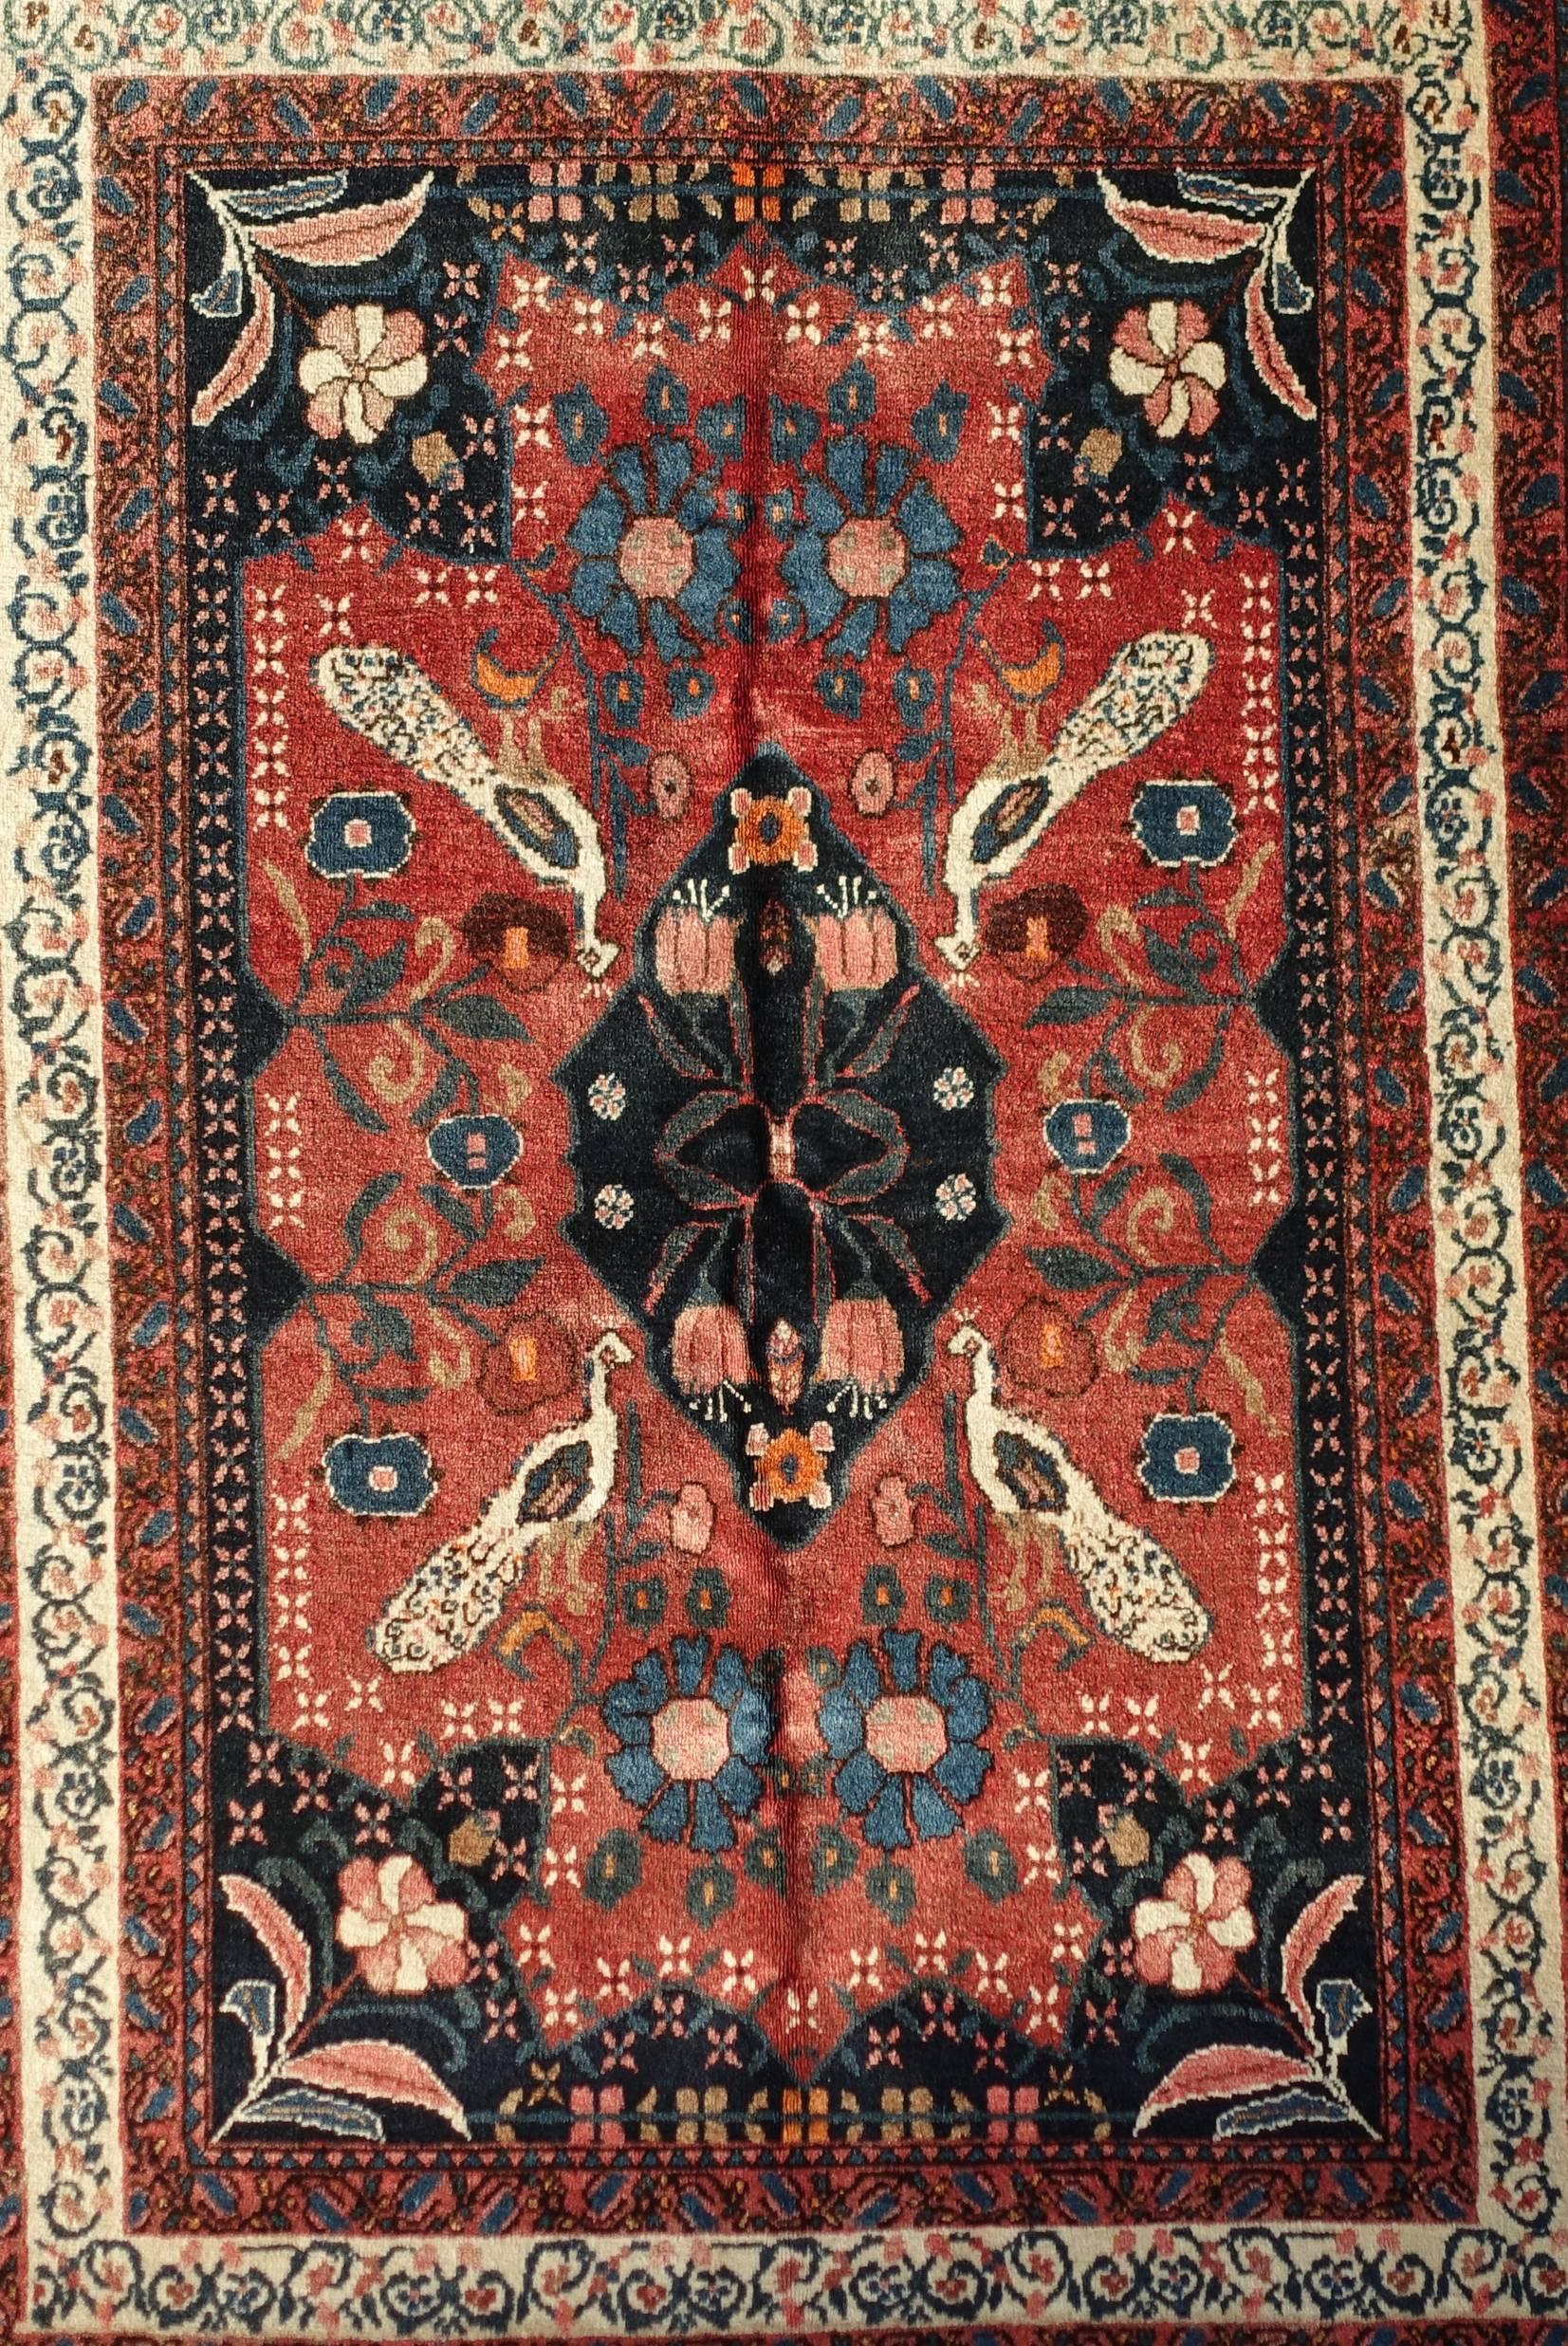 This is a beautiful authentic Persian Abadeh from the 1970s. It measures 110 x 160cm. This rug features a small central medallion and a number of typical nomadic geometrical motifs including peacocks (symbol of prosperity). Abadeh rugs are very